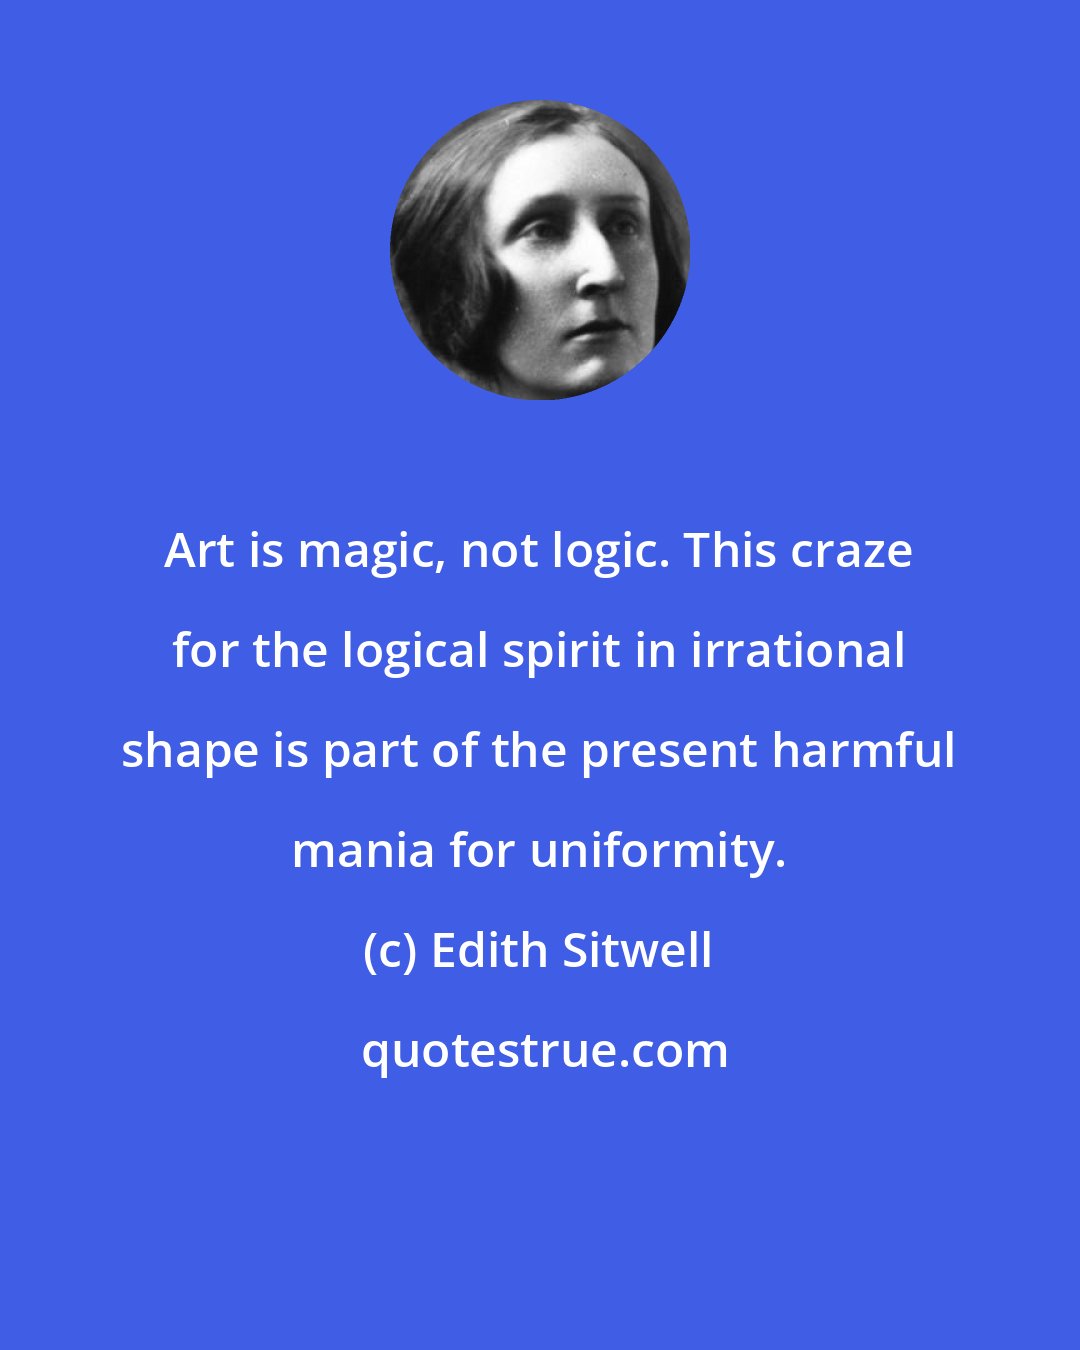 Edith Sitwell: Art is magic, not logic. This craze for the logical spirit in irrational shape is part of the present harmful mania for uniformity.